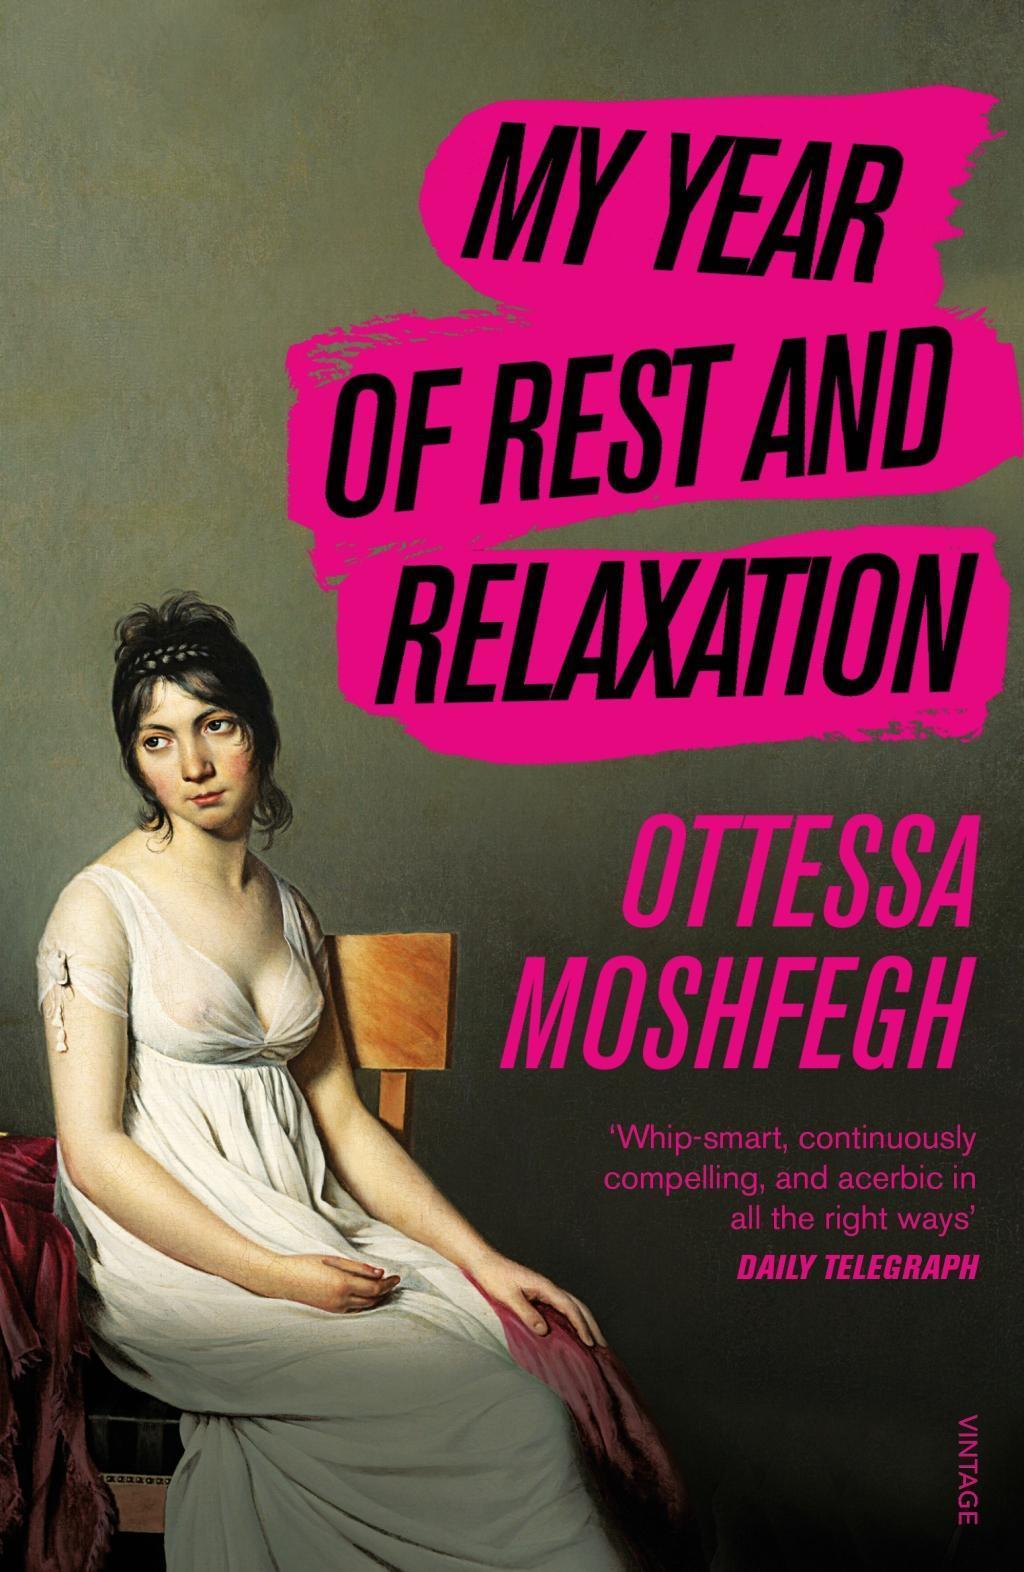 Ottessa Moshfegh: My Year of Rest and Relaxation (2018, Penguin Random House)